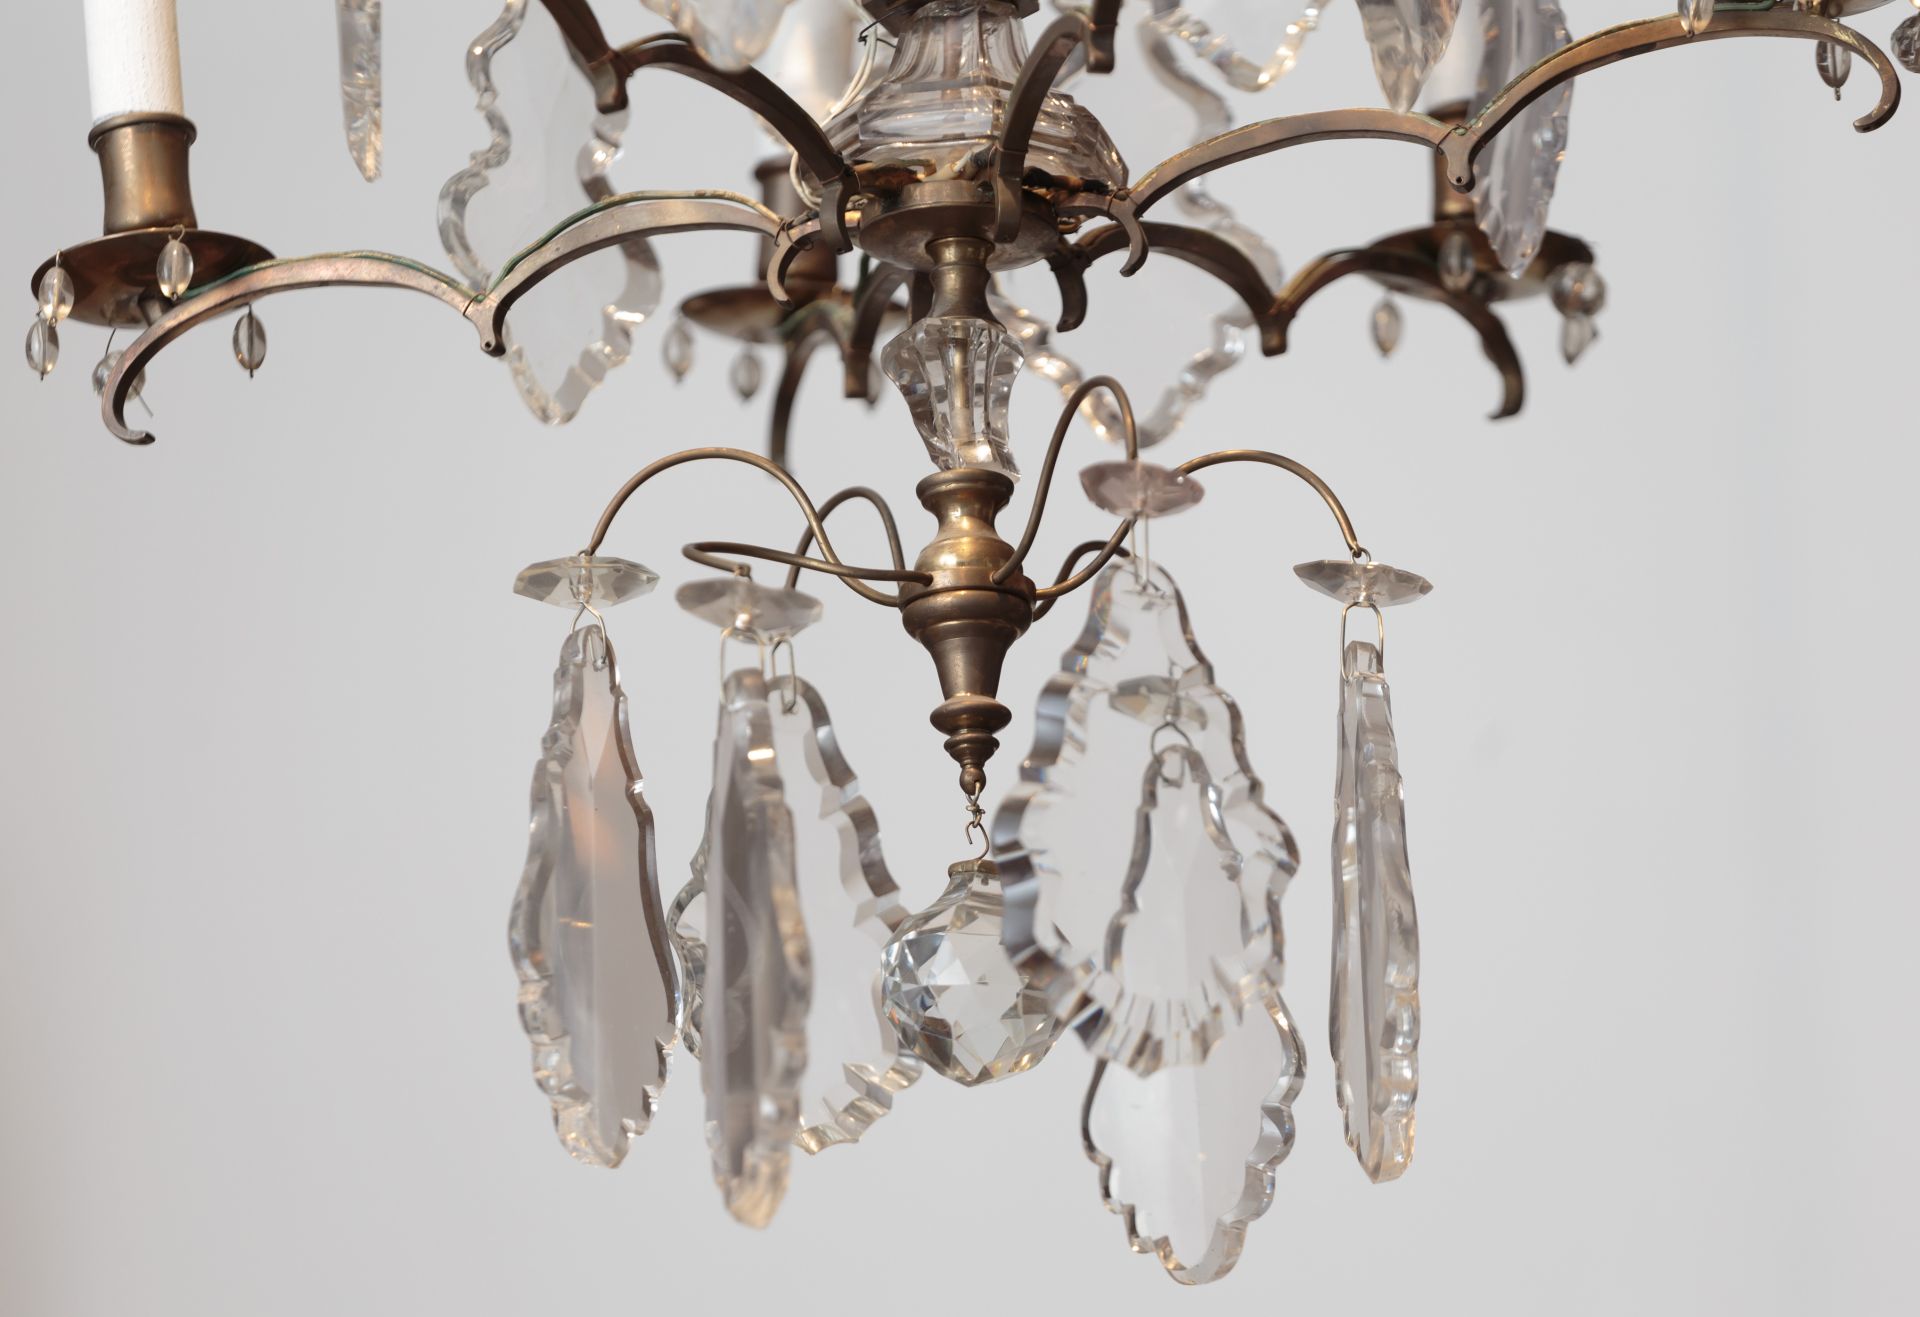 Fragment of chandelier, 1887–1911, Lithuanian National Museum of Art, TM-840. Photo by Tomas Kapočius, 2017